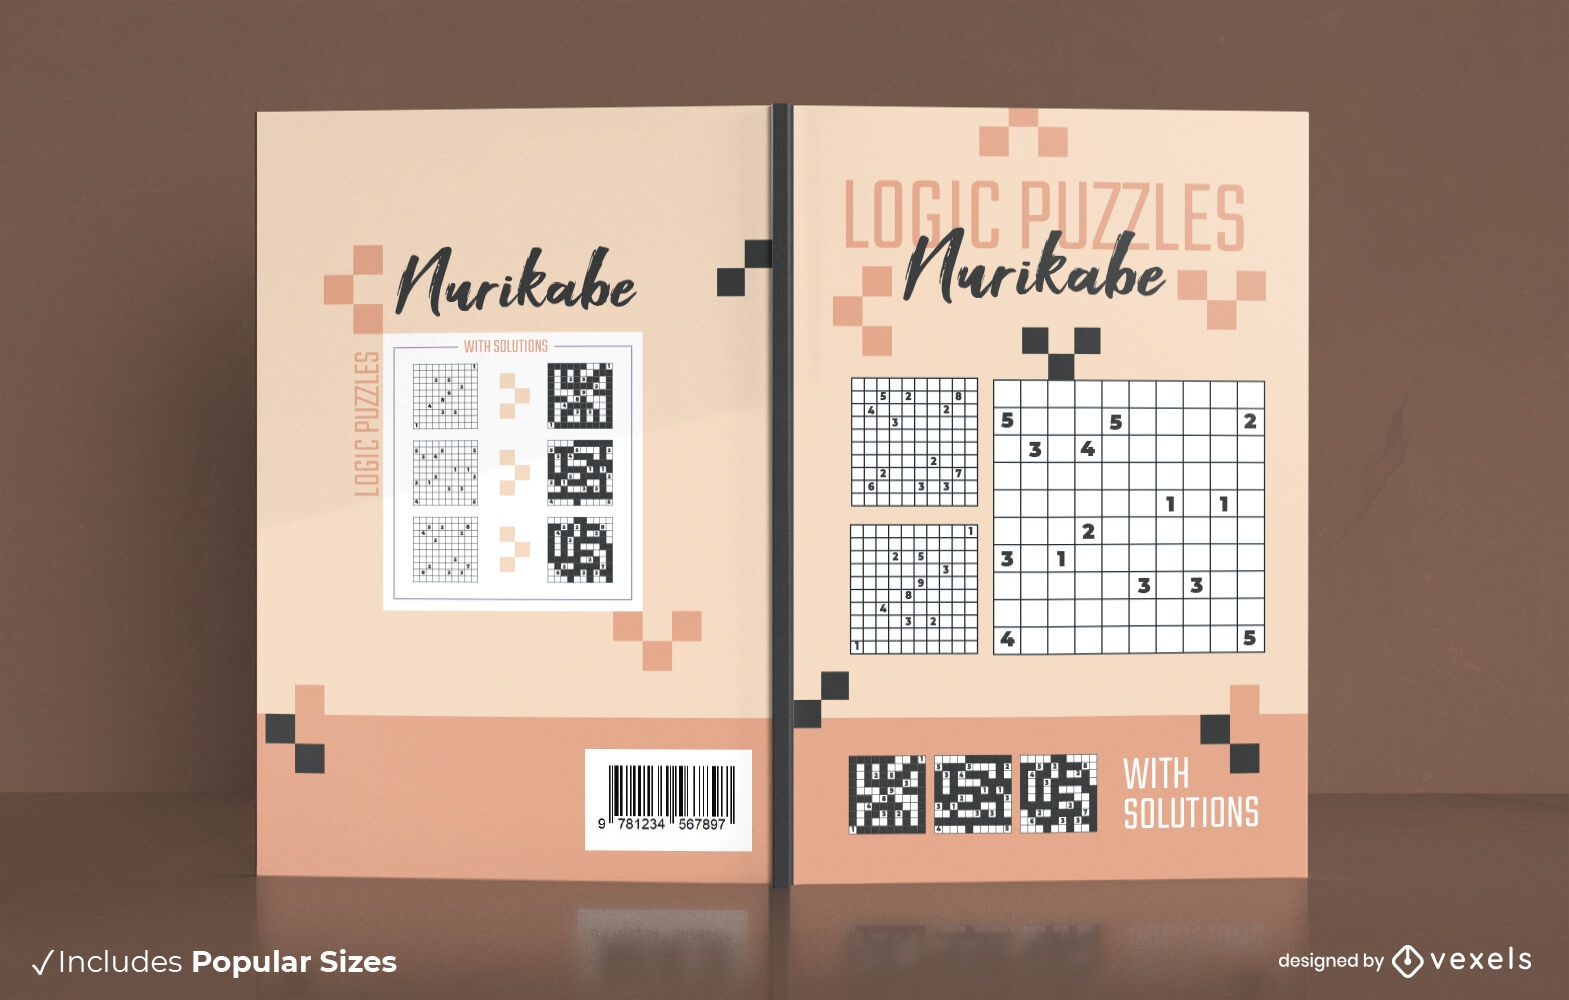 Logic puzzles hobby book cover design